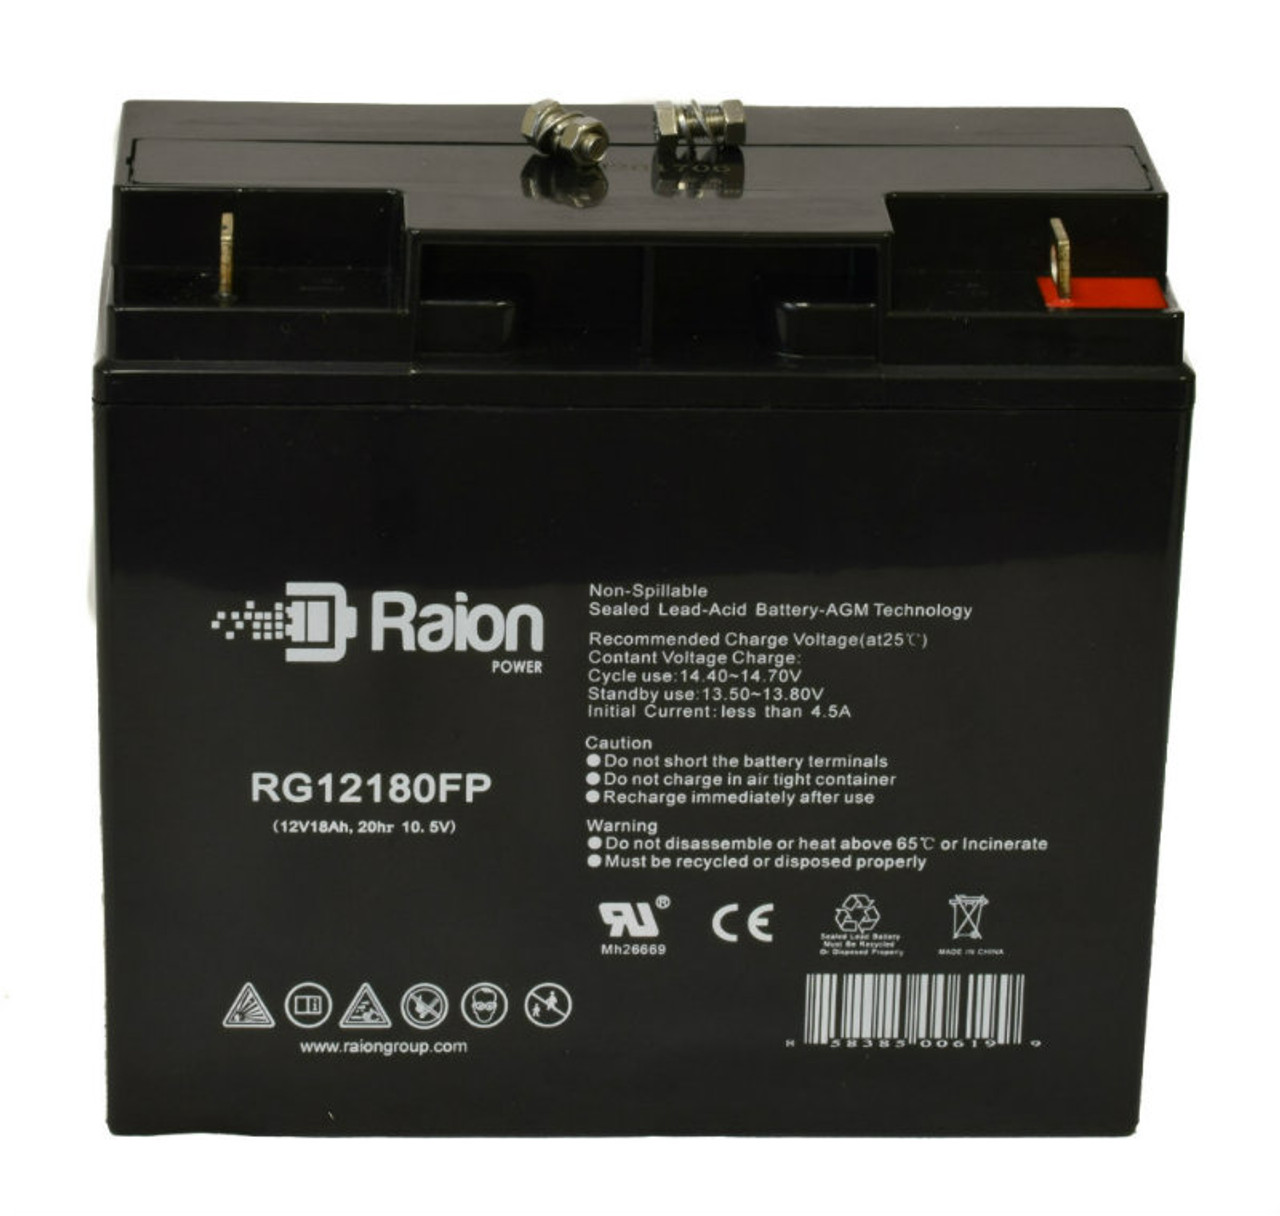 Raion Power RG12180FP 12V 18Ah Lead Acid Battery for EV Rider Stand N Ride with Seat